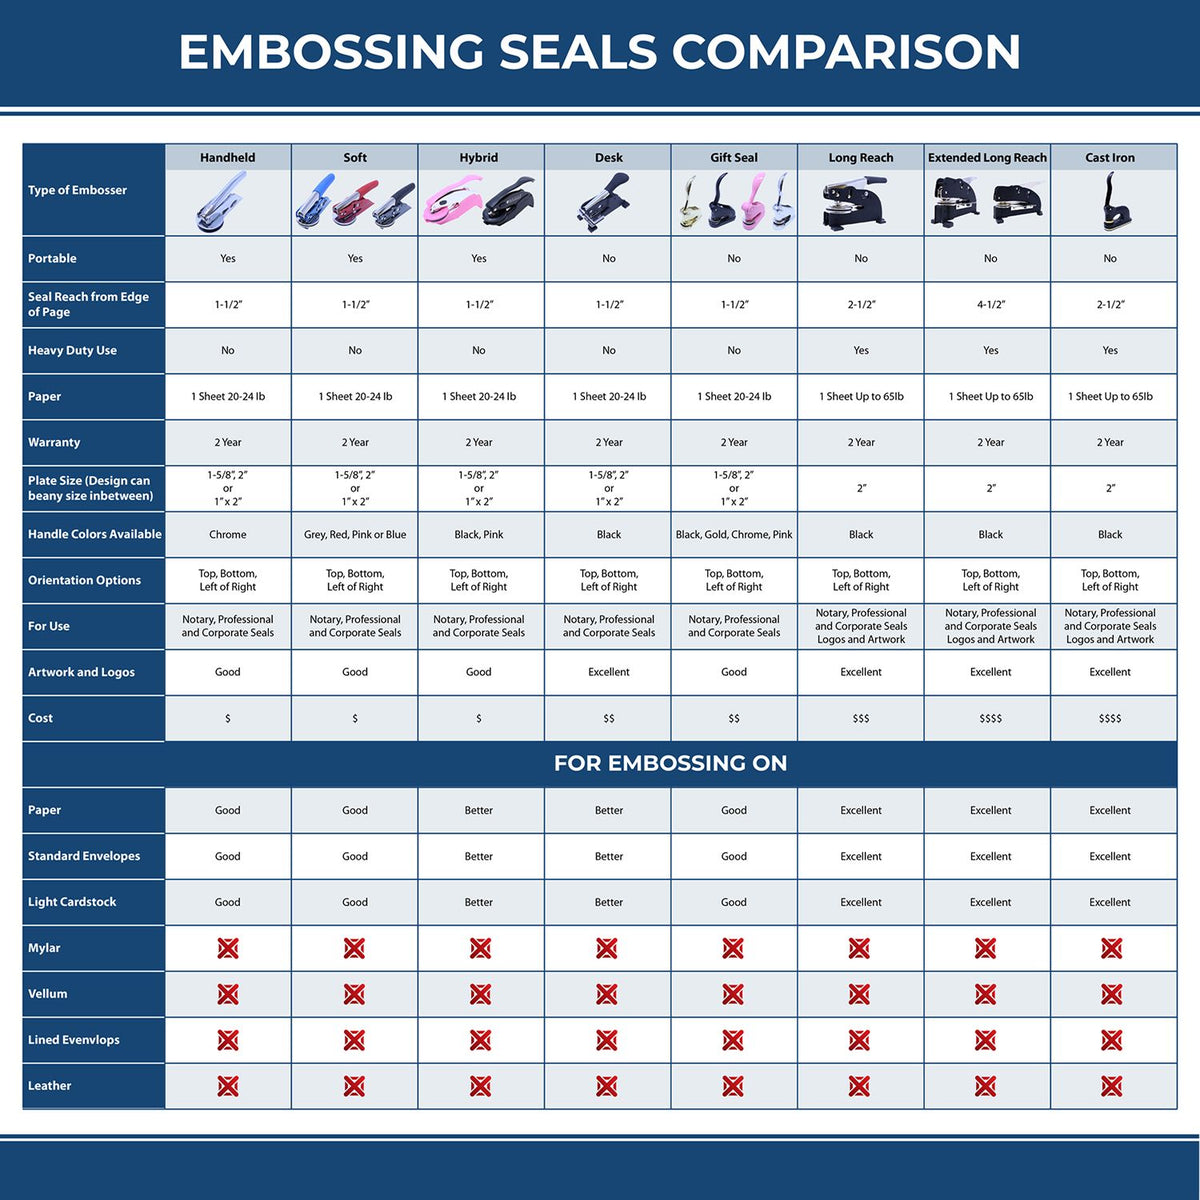 A comparison chart for the different types of mount models available for the Massachusetts Desk Surveyor Seal Embosser.